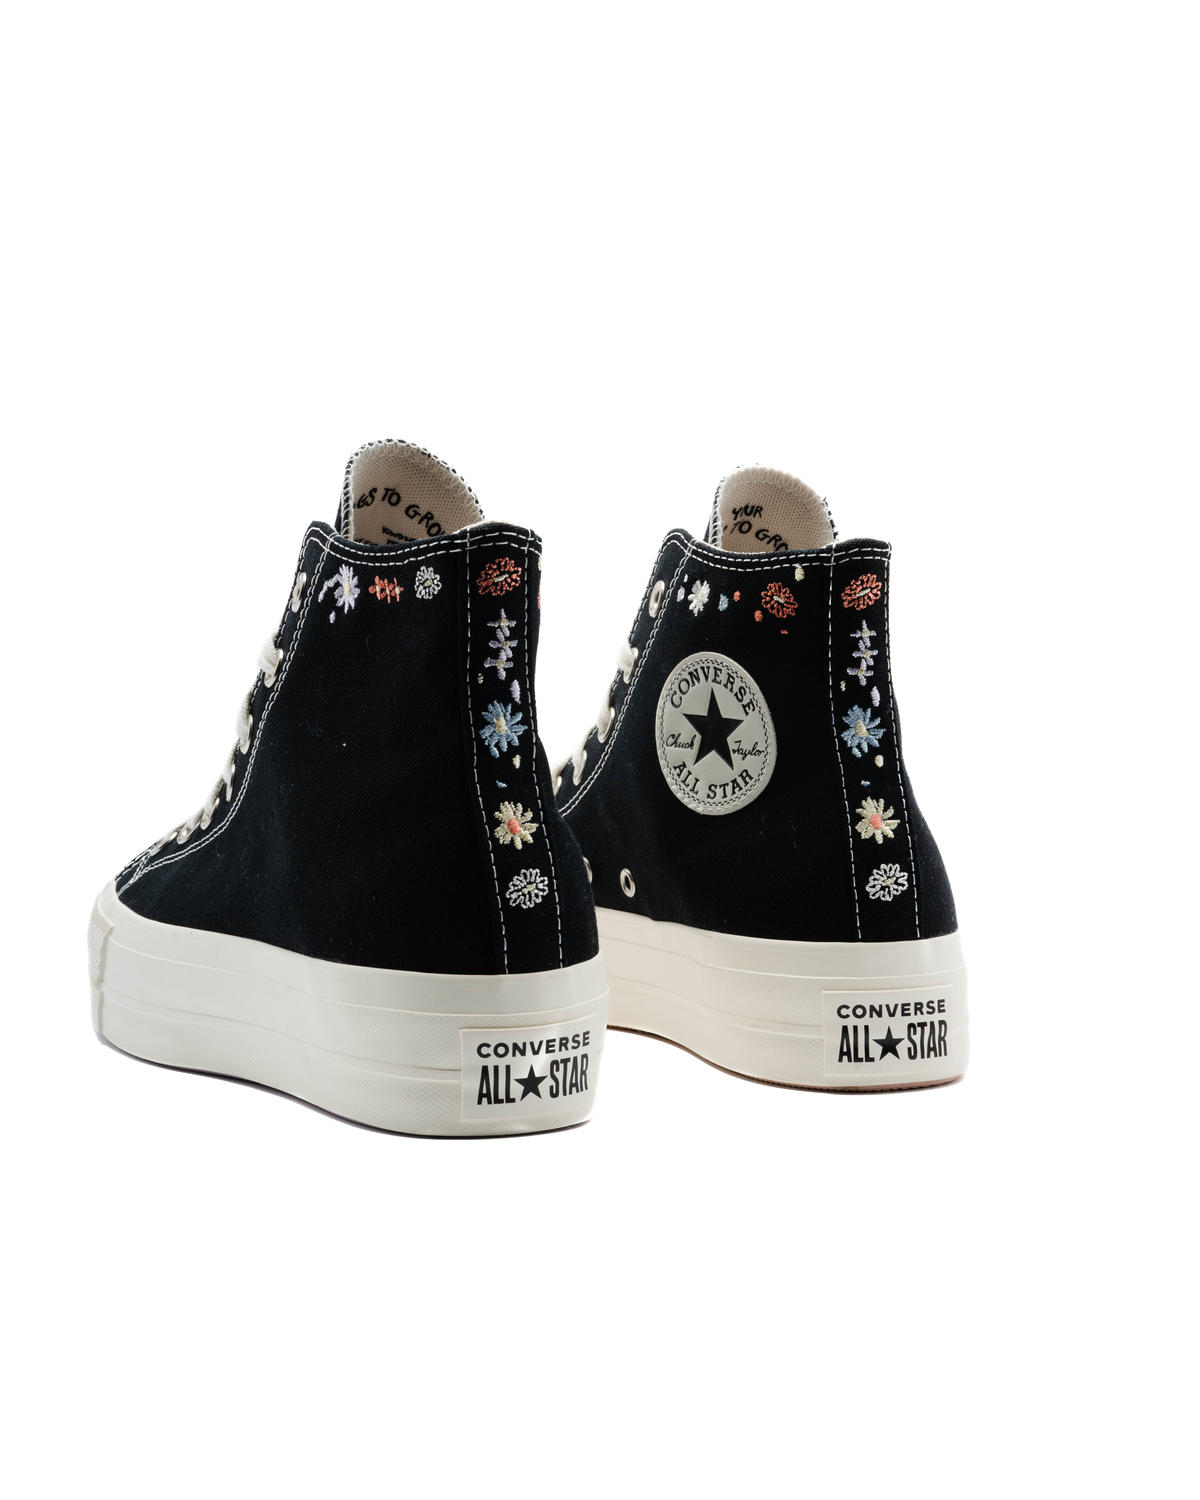 CarnejovenShops STORE | A01592C | Converse Chuck Taylor All Stars LIFT HIGH  | the most luxe looking sneakers available at converse right now